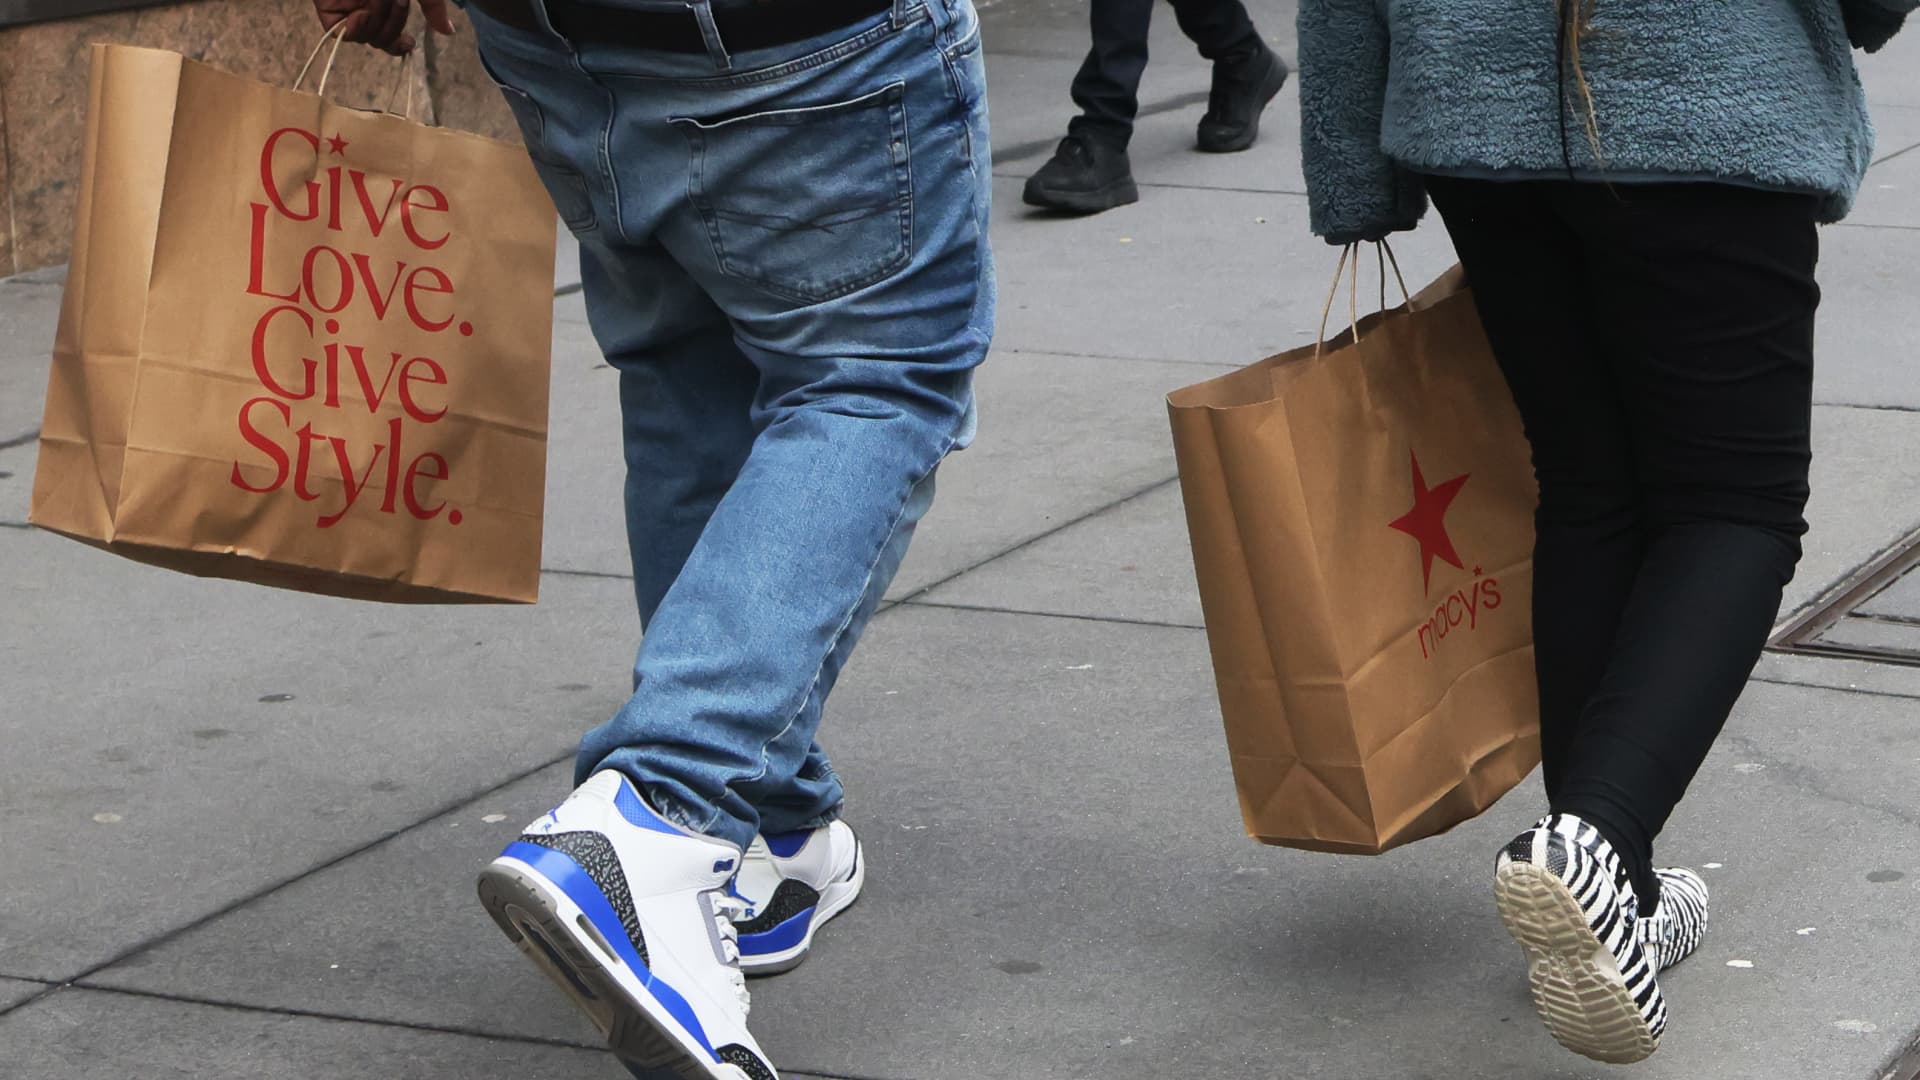 Retail sales jumped 0.7% in March, much higher than expected [Video]